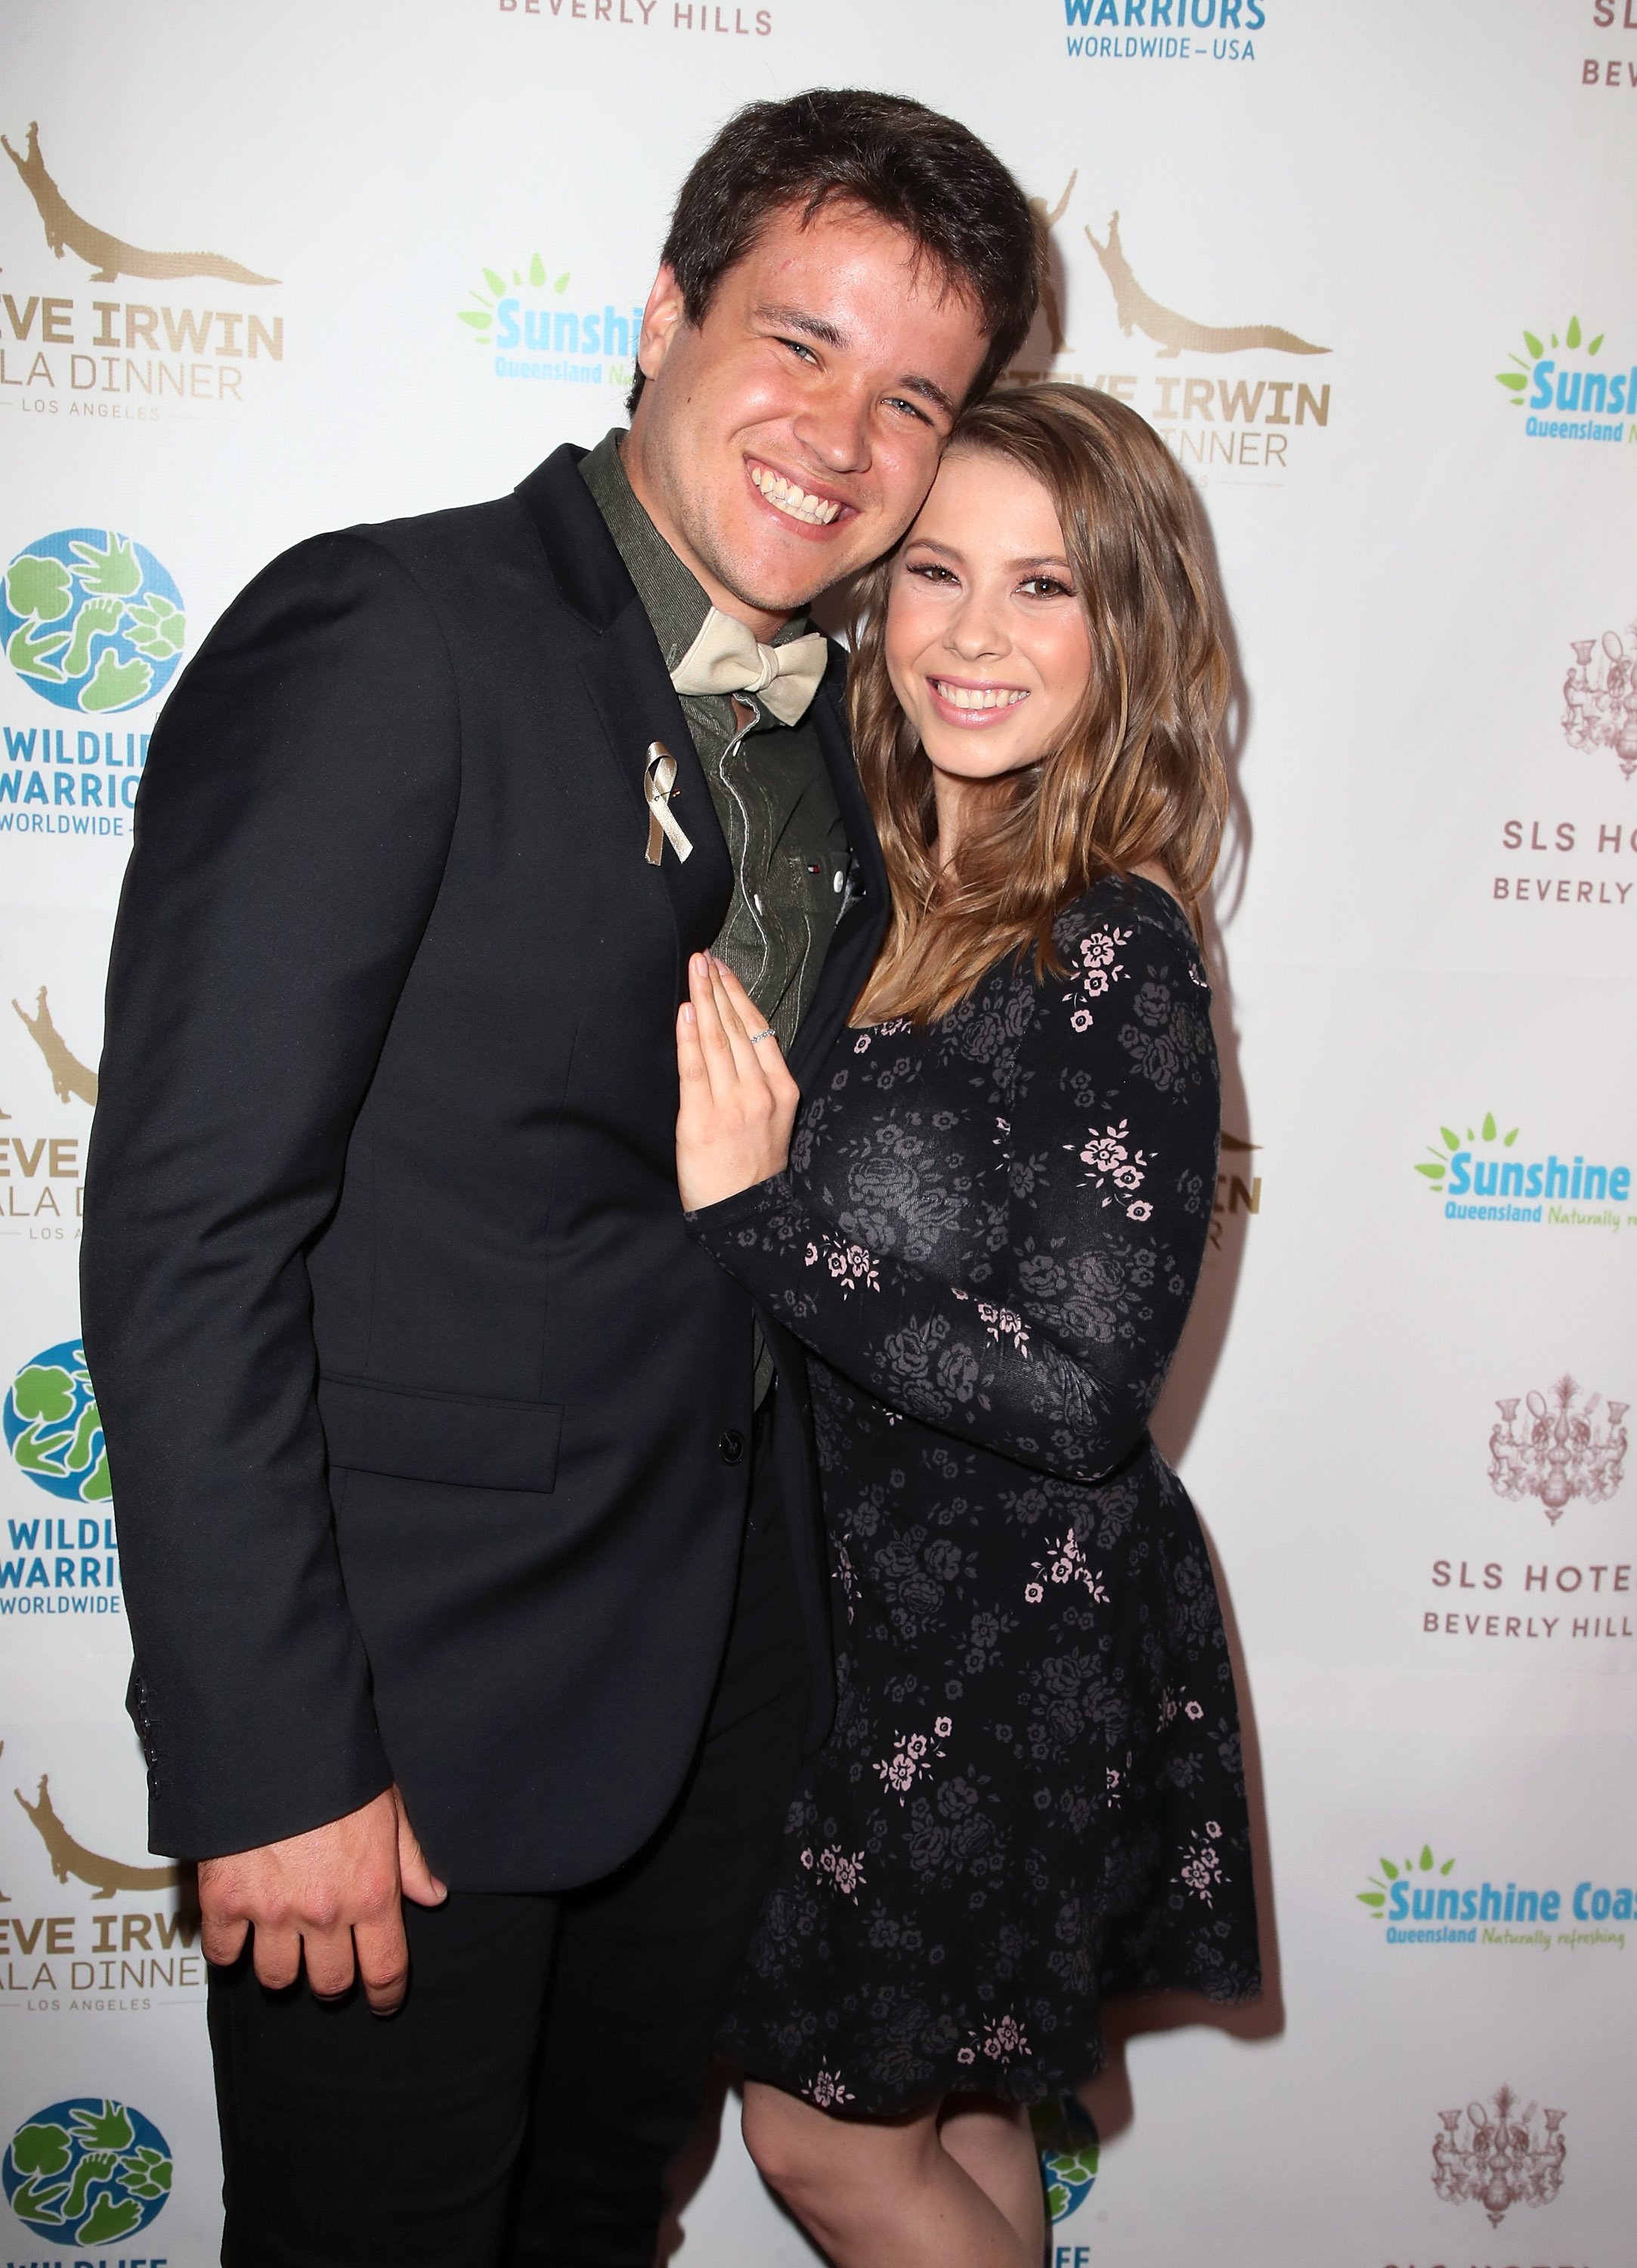 Chandler Powell and Bindi Irwin attend the Steve Irwin Gala Dinner 2018 at SLS Hotel on May 5, 2018 in Beverly Hills, California | Photo: Getty Images